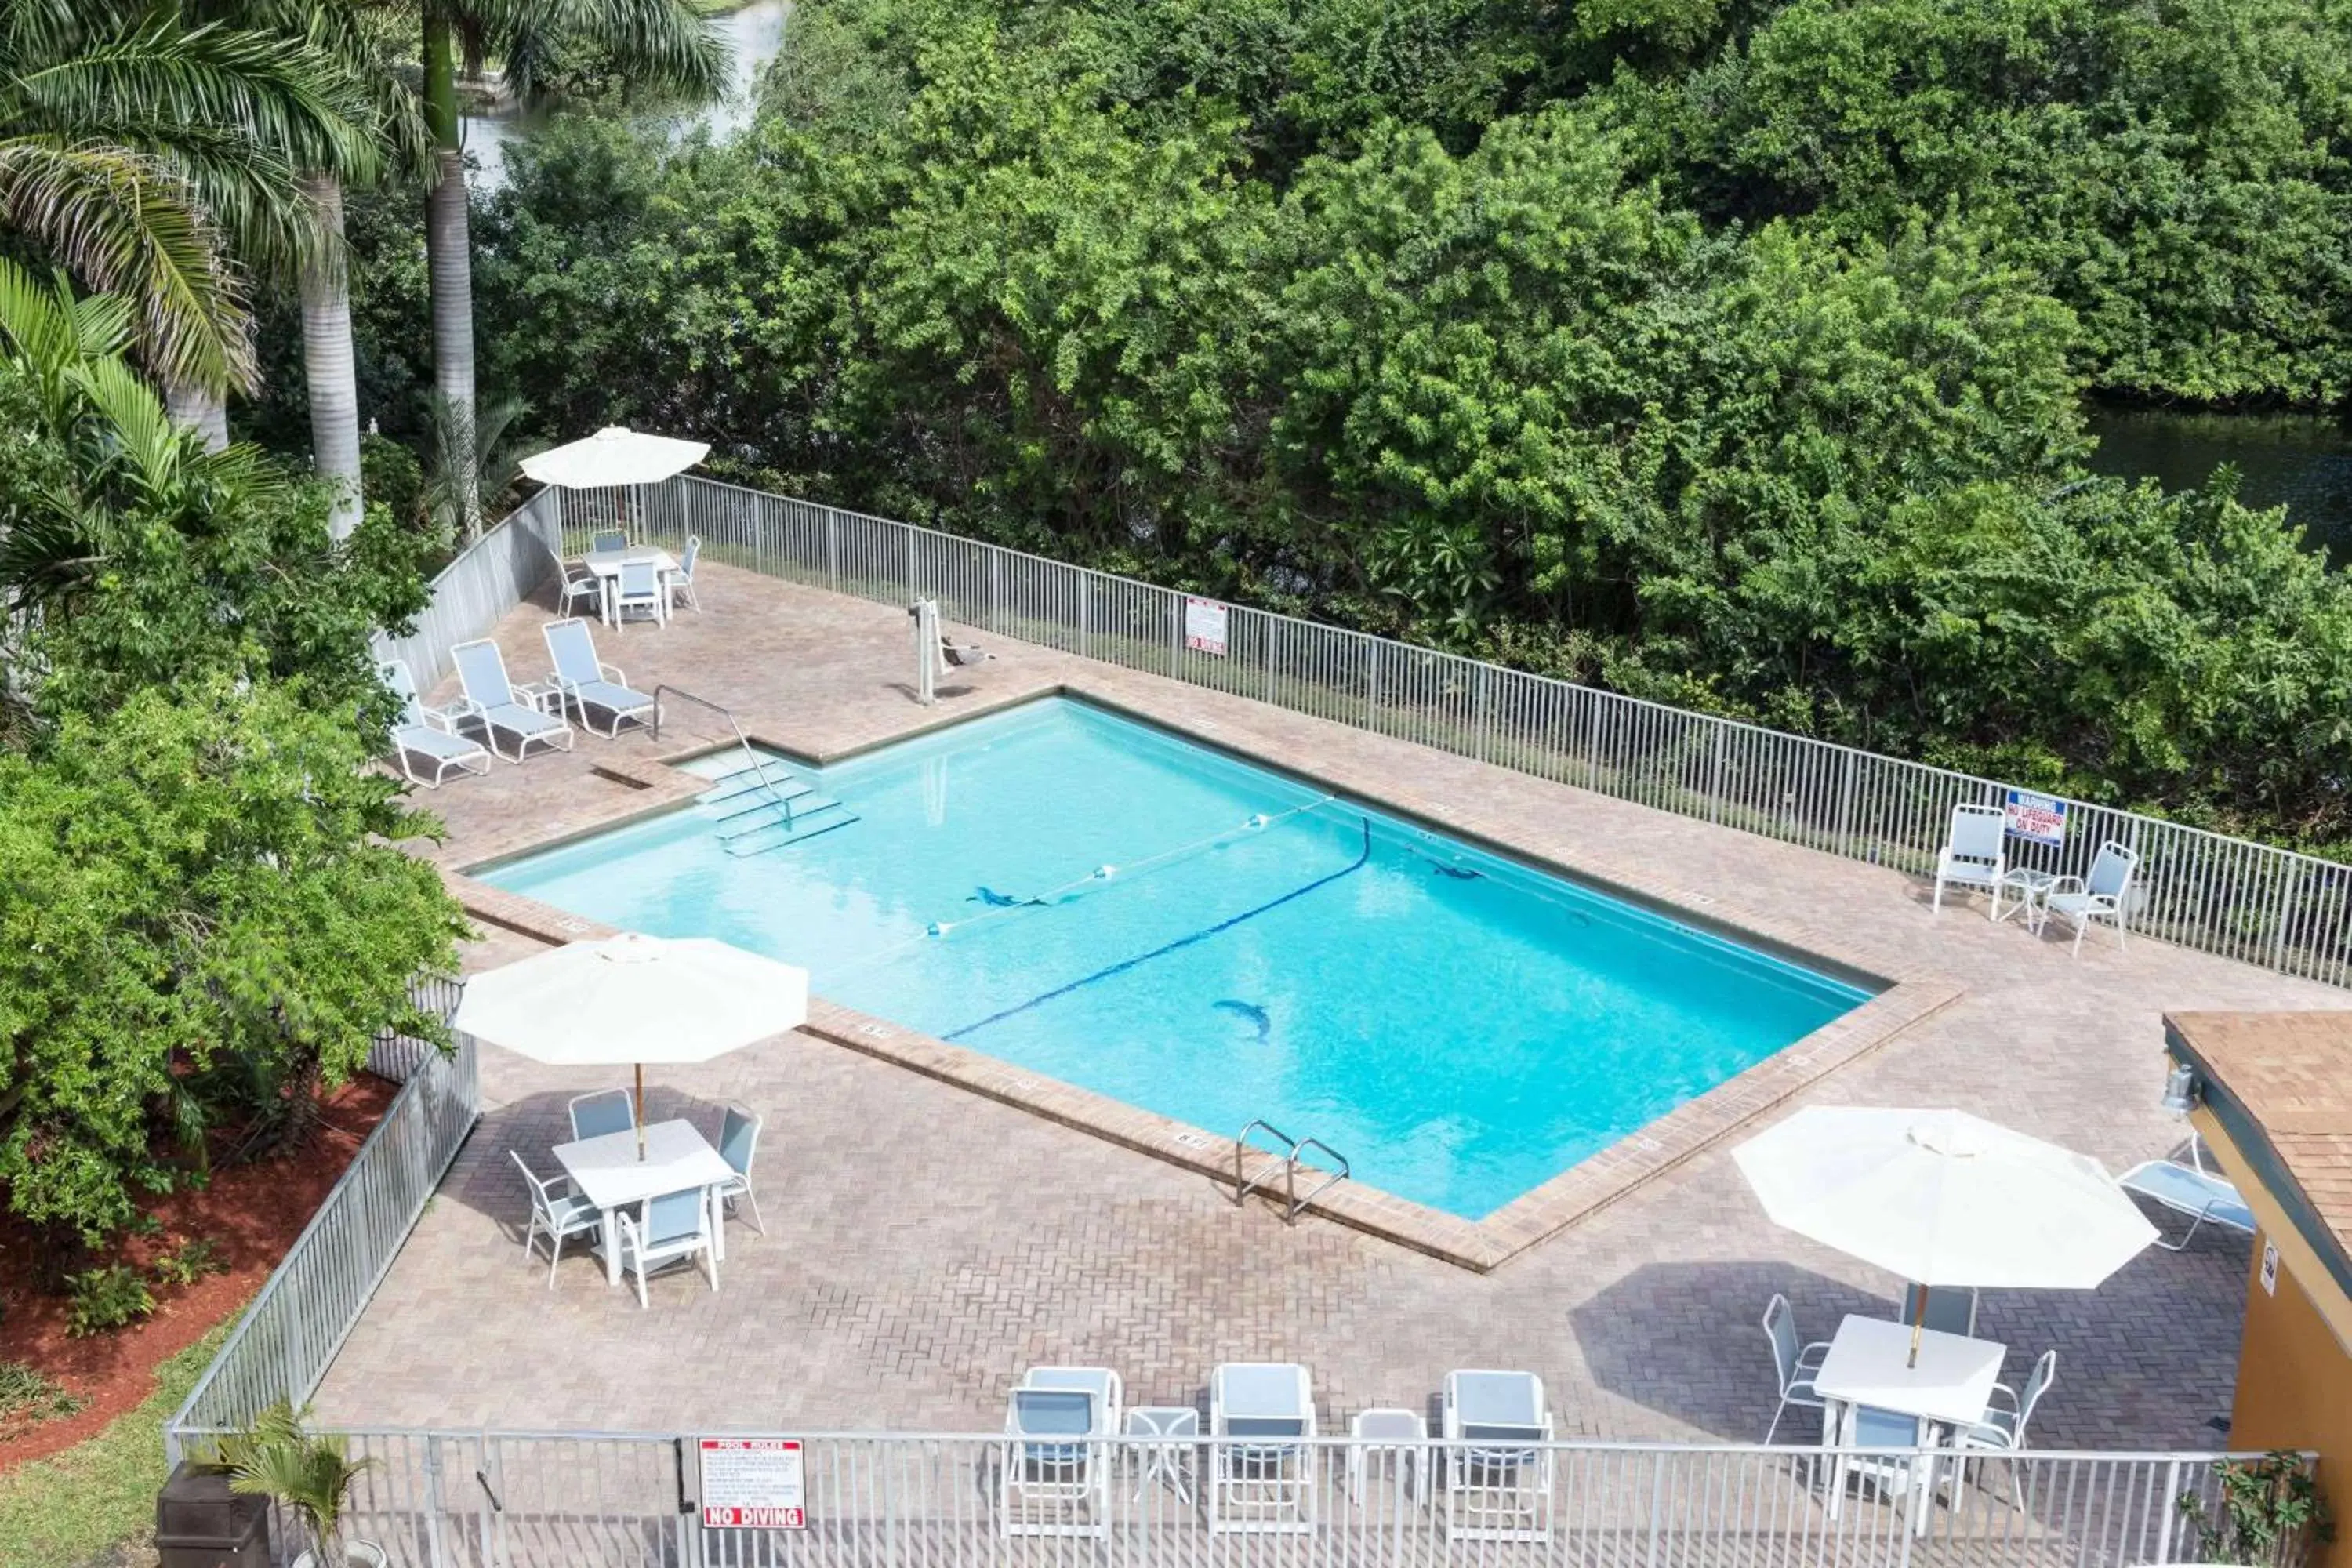 On site, Pool View in Days Inn by Wyndham Fort Lauderdale-Oakland Park Airport N